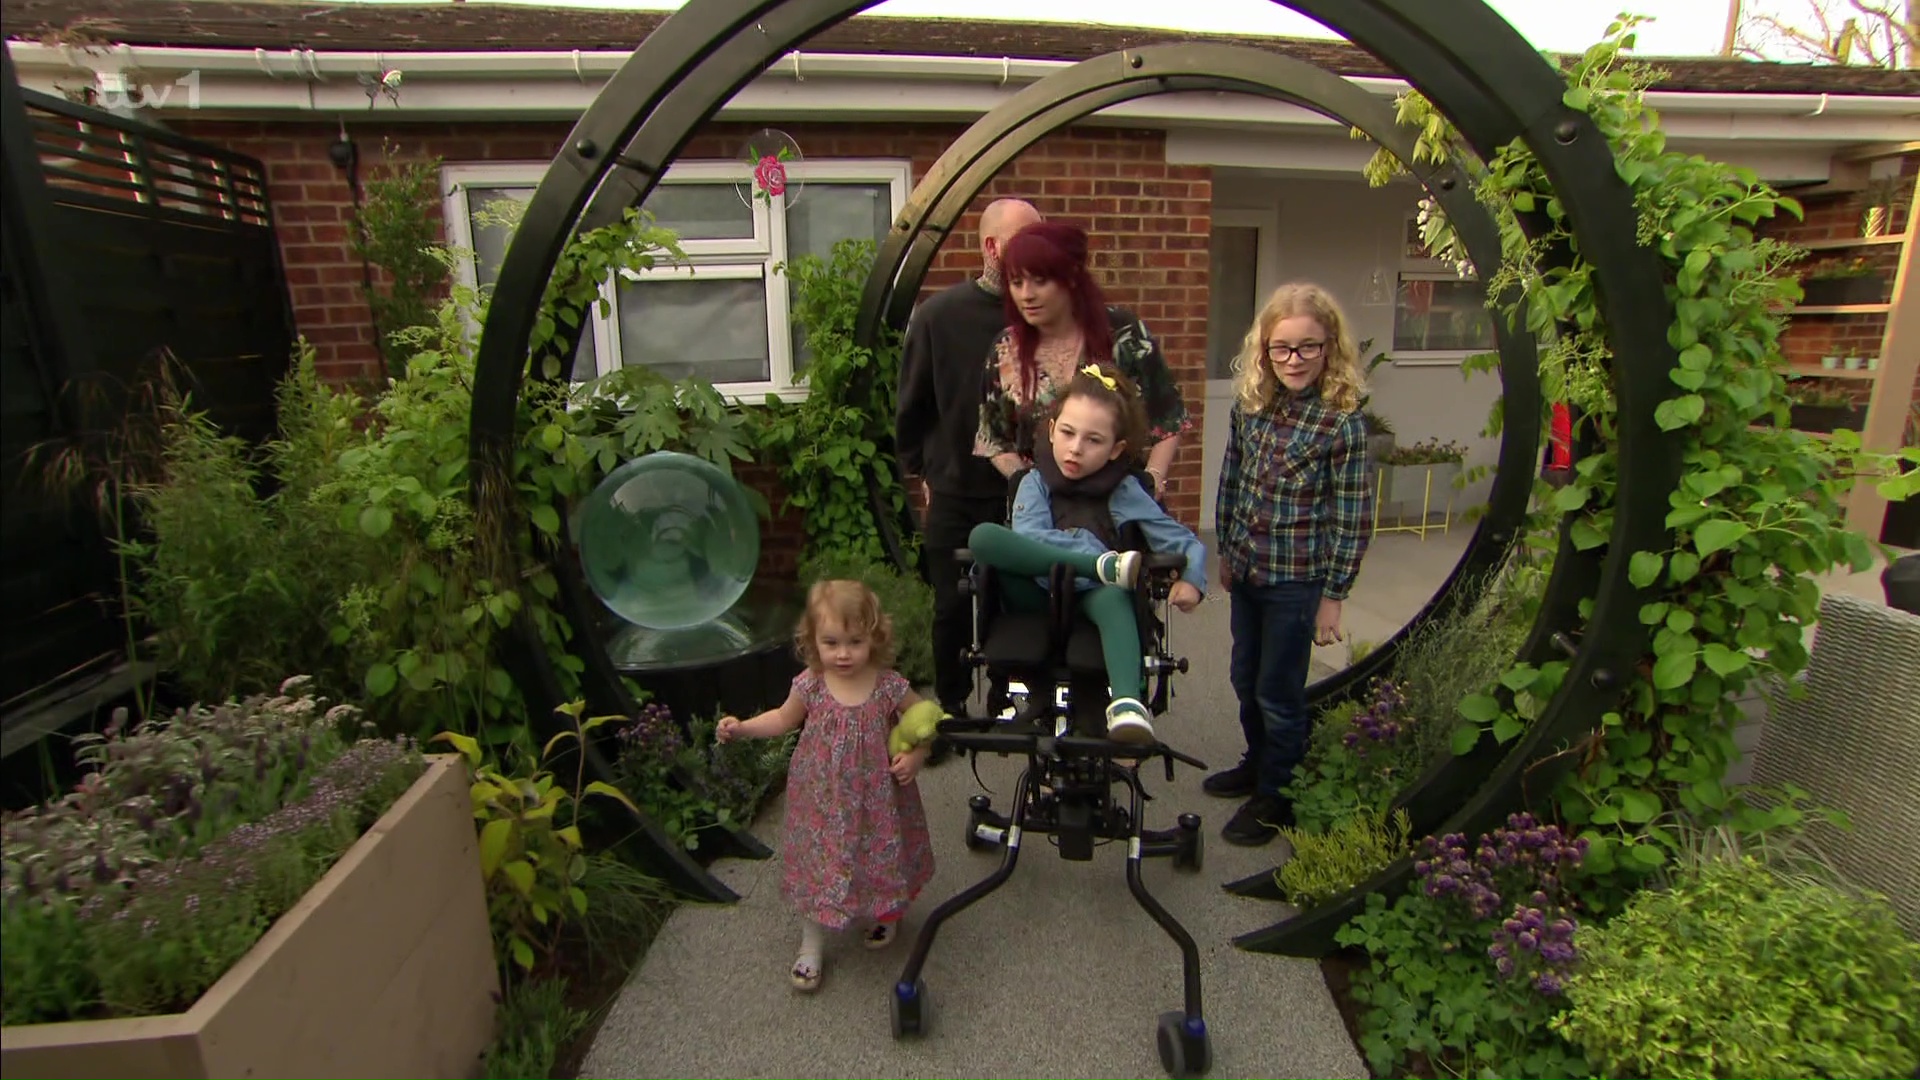 The family were given the makeover from ITV's Love Your Garden